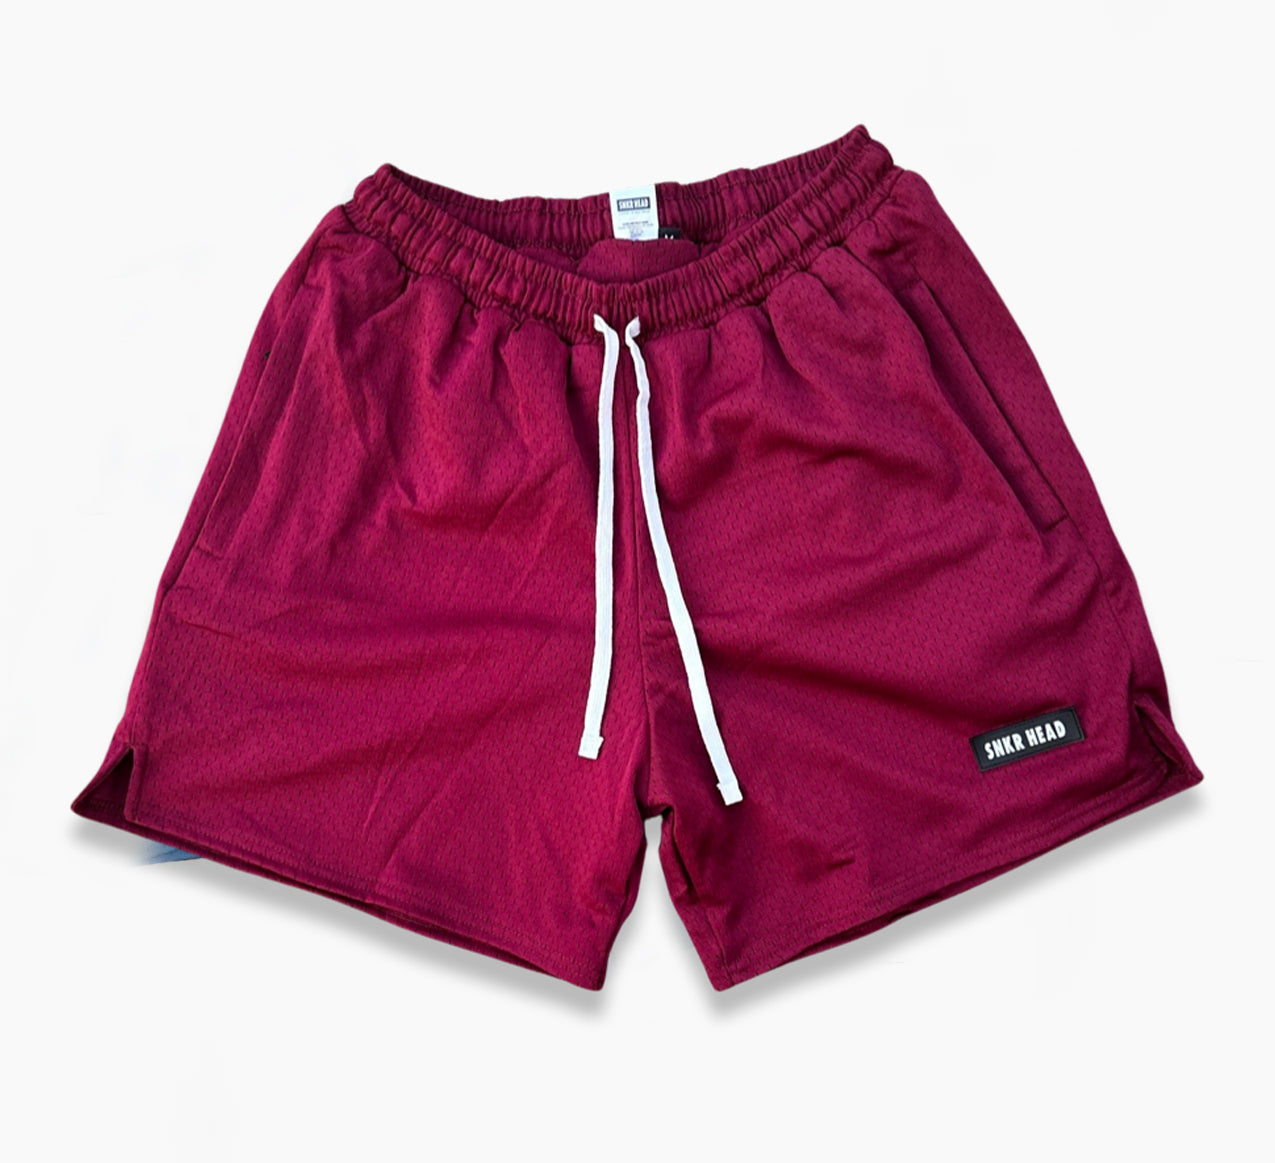 Cut & Sew Everyday SNKR HEAD Maroon Rubber Patch Shorts